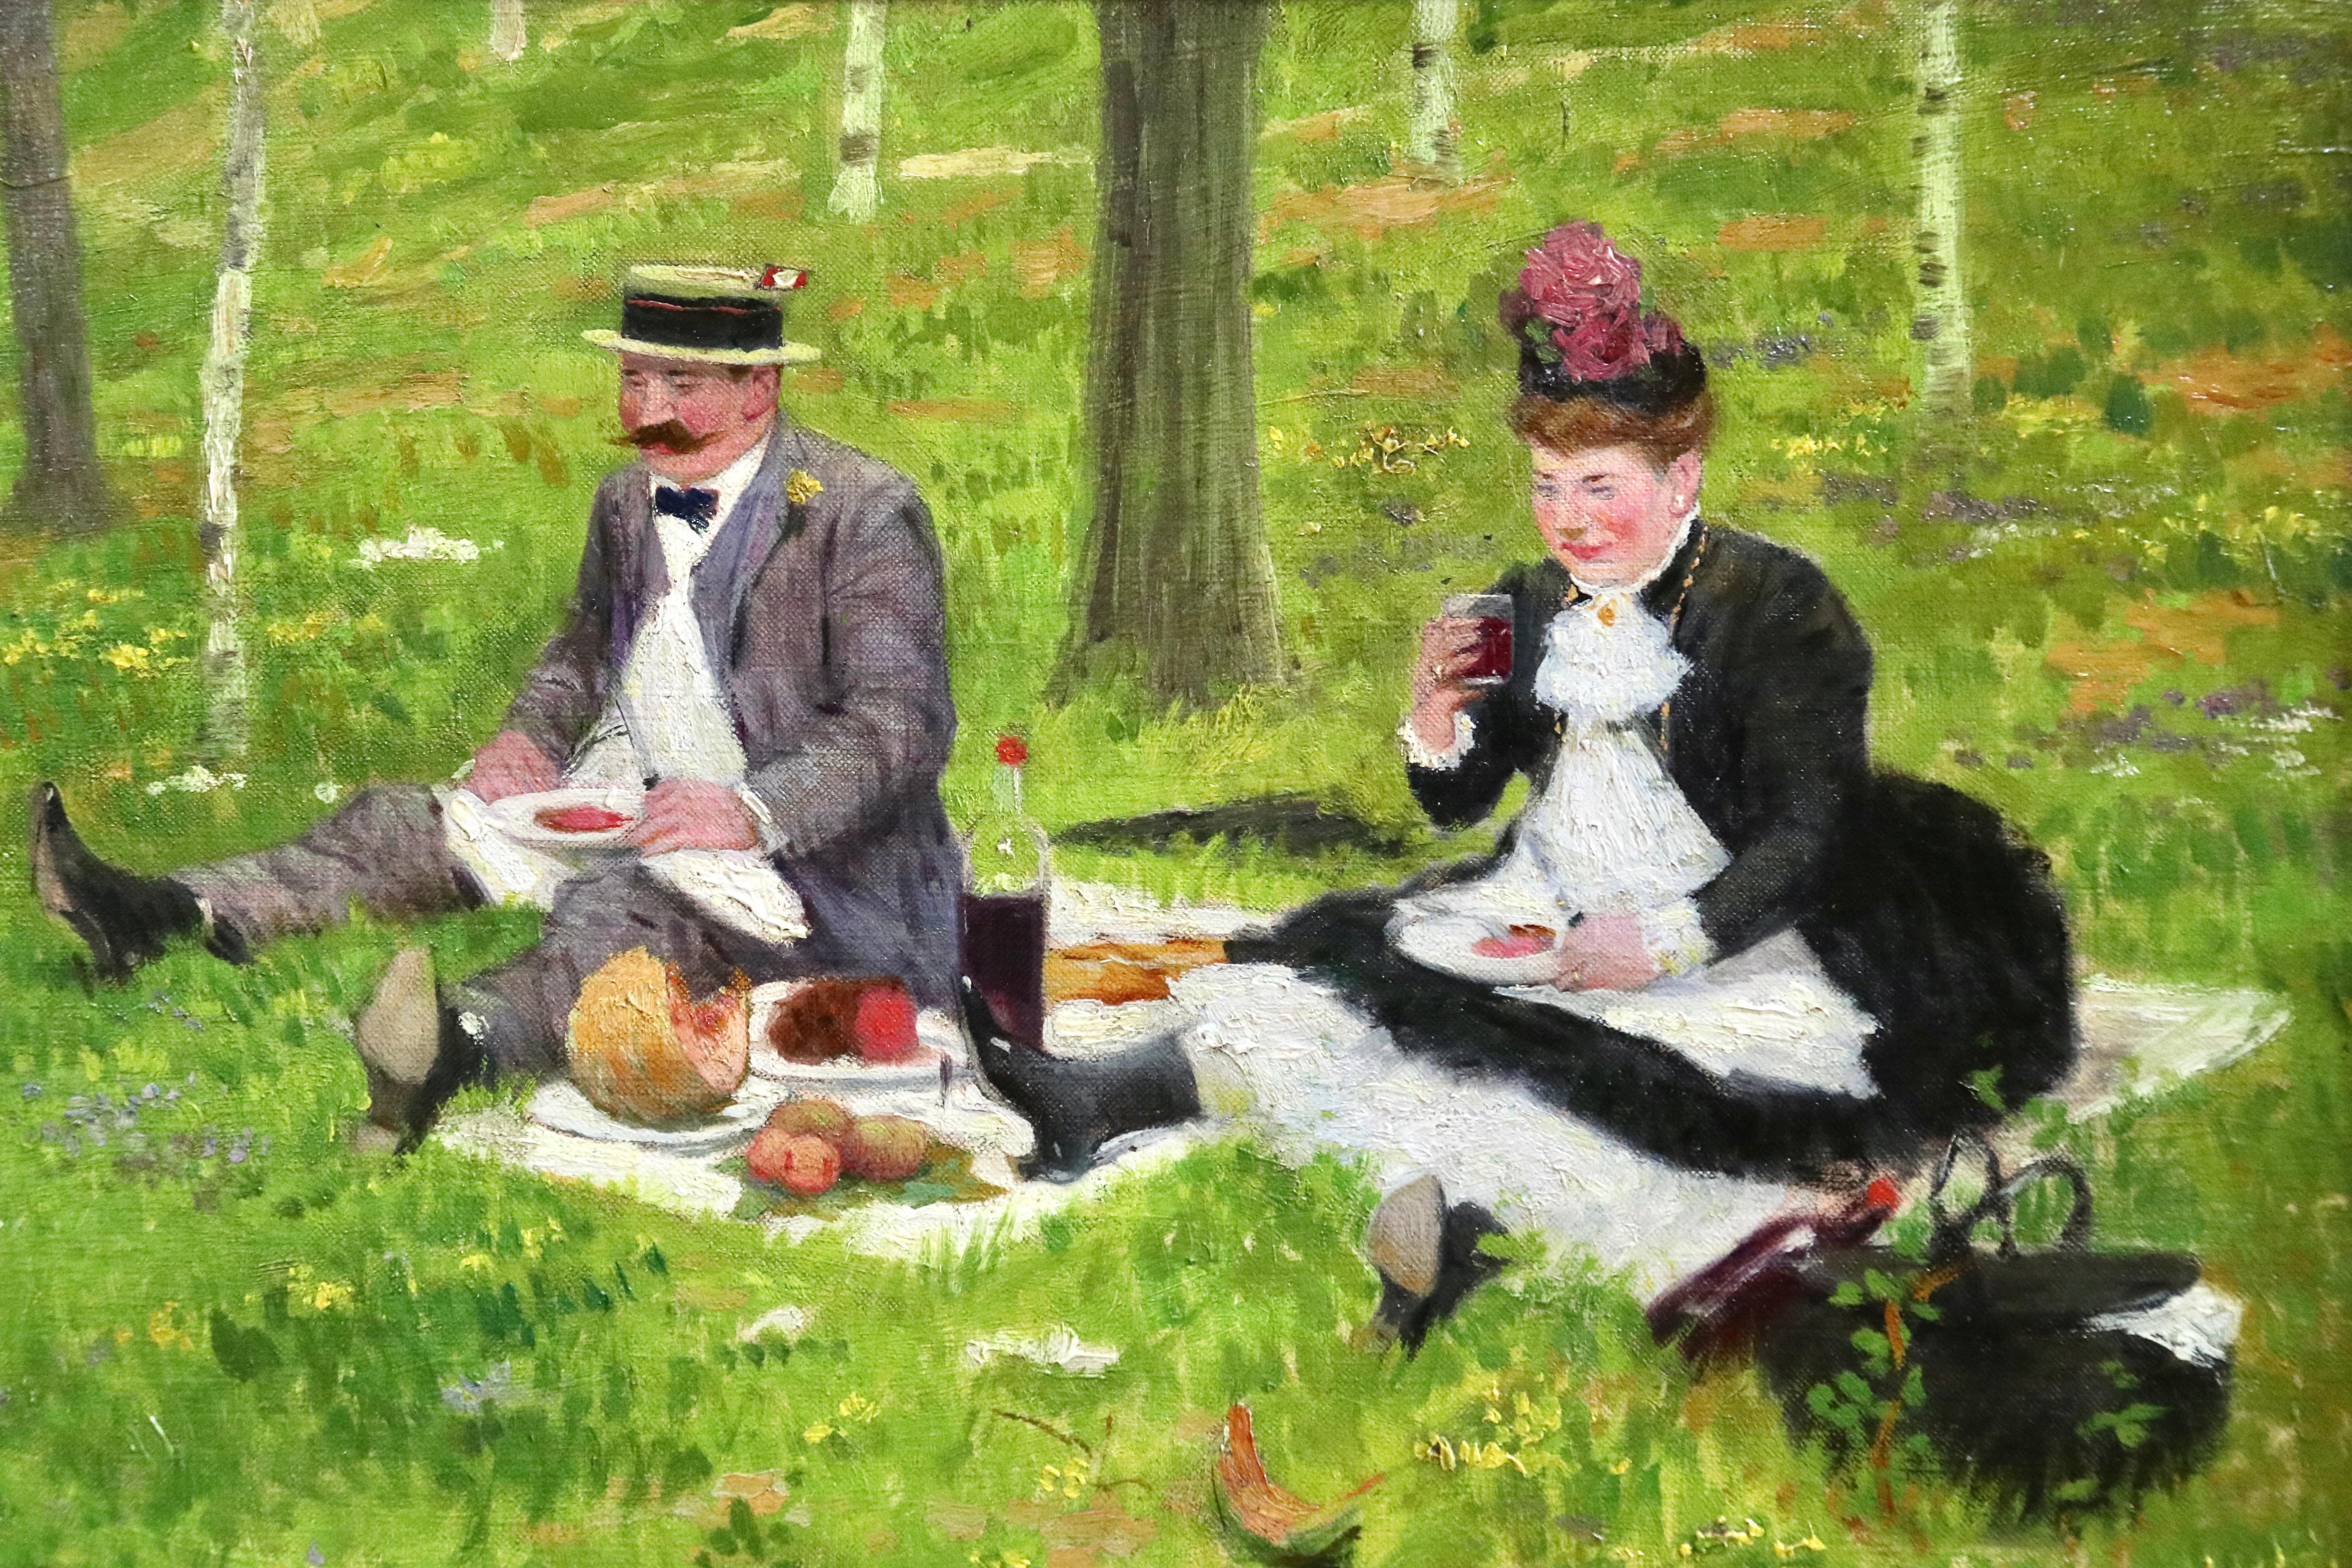  Oil on canvas by Jacques Wely depicting an elegant man and woman enjoying a picnic. Signed and dated 1909 lower right. Framed dimensions are 19 inches high by 22 inches wide.

Jacques Wely Jacques Wely was a French painter and illustrator born in